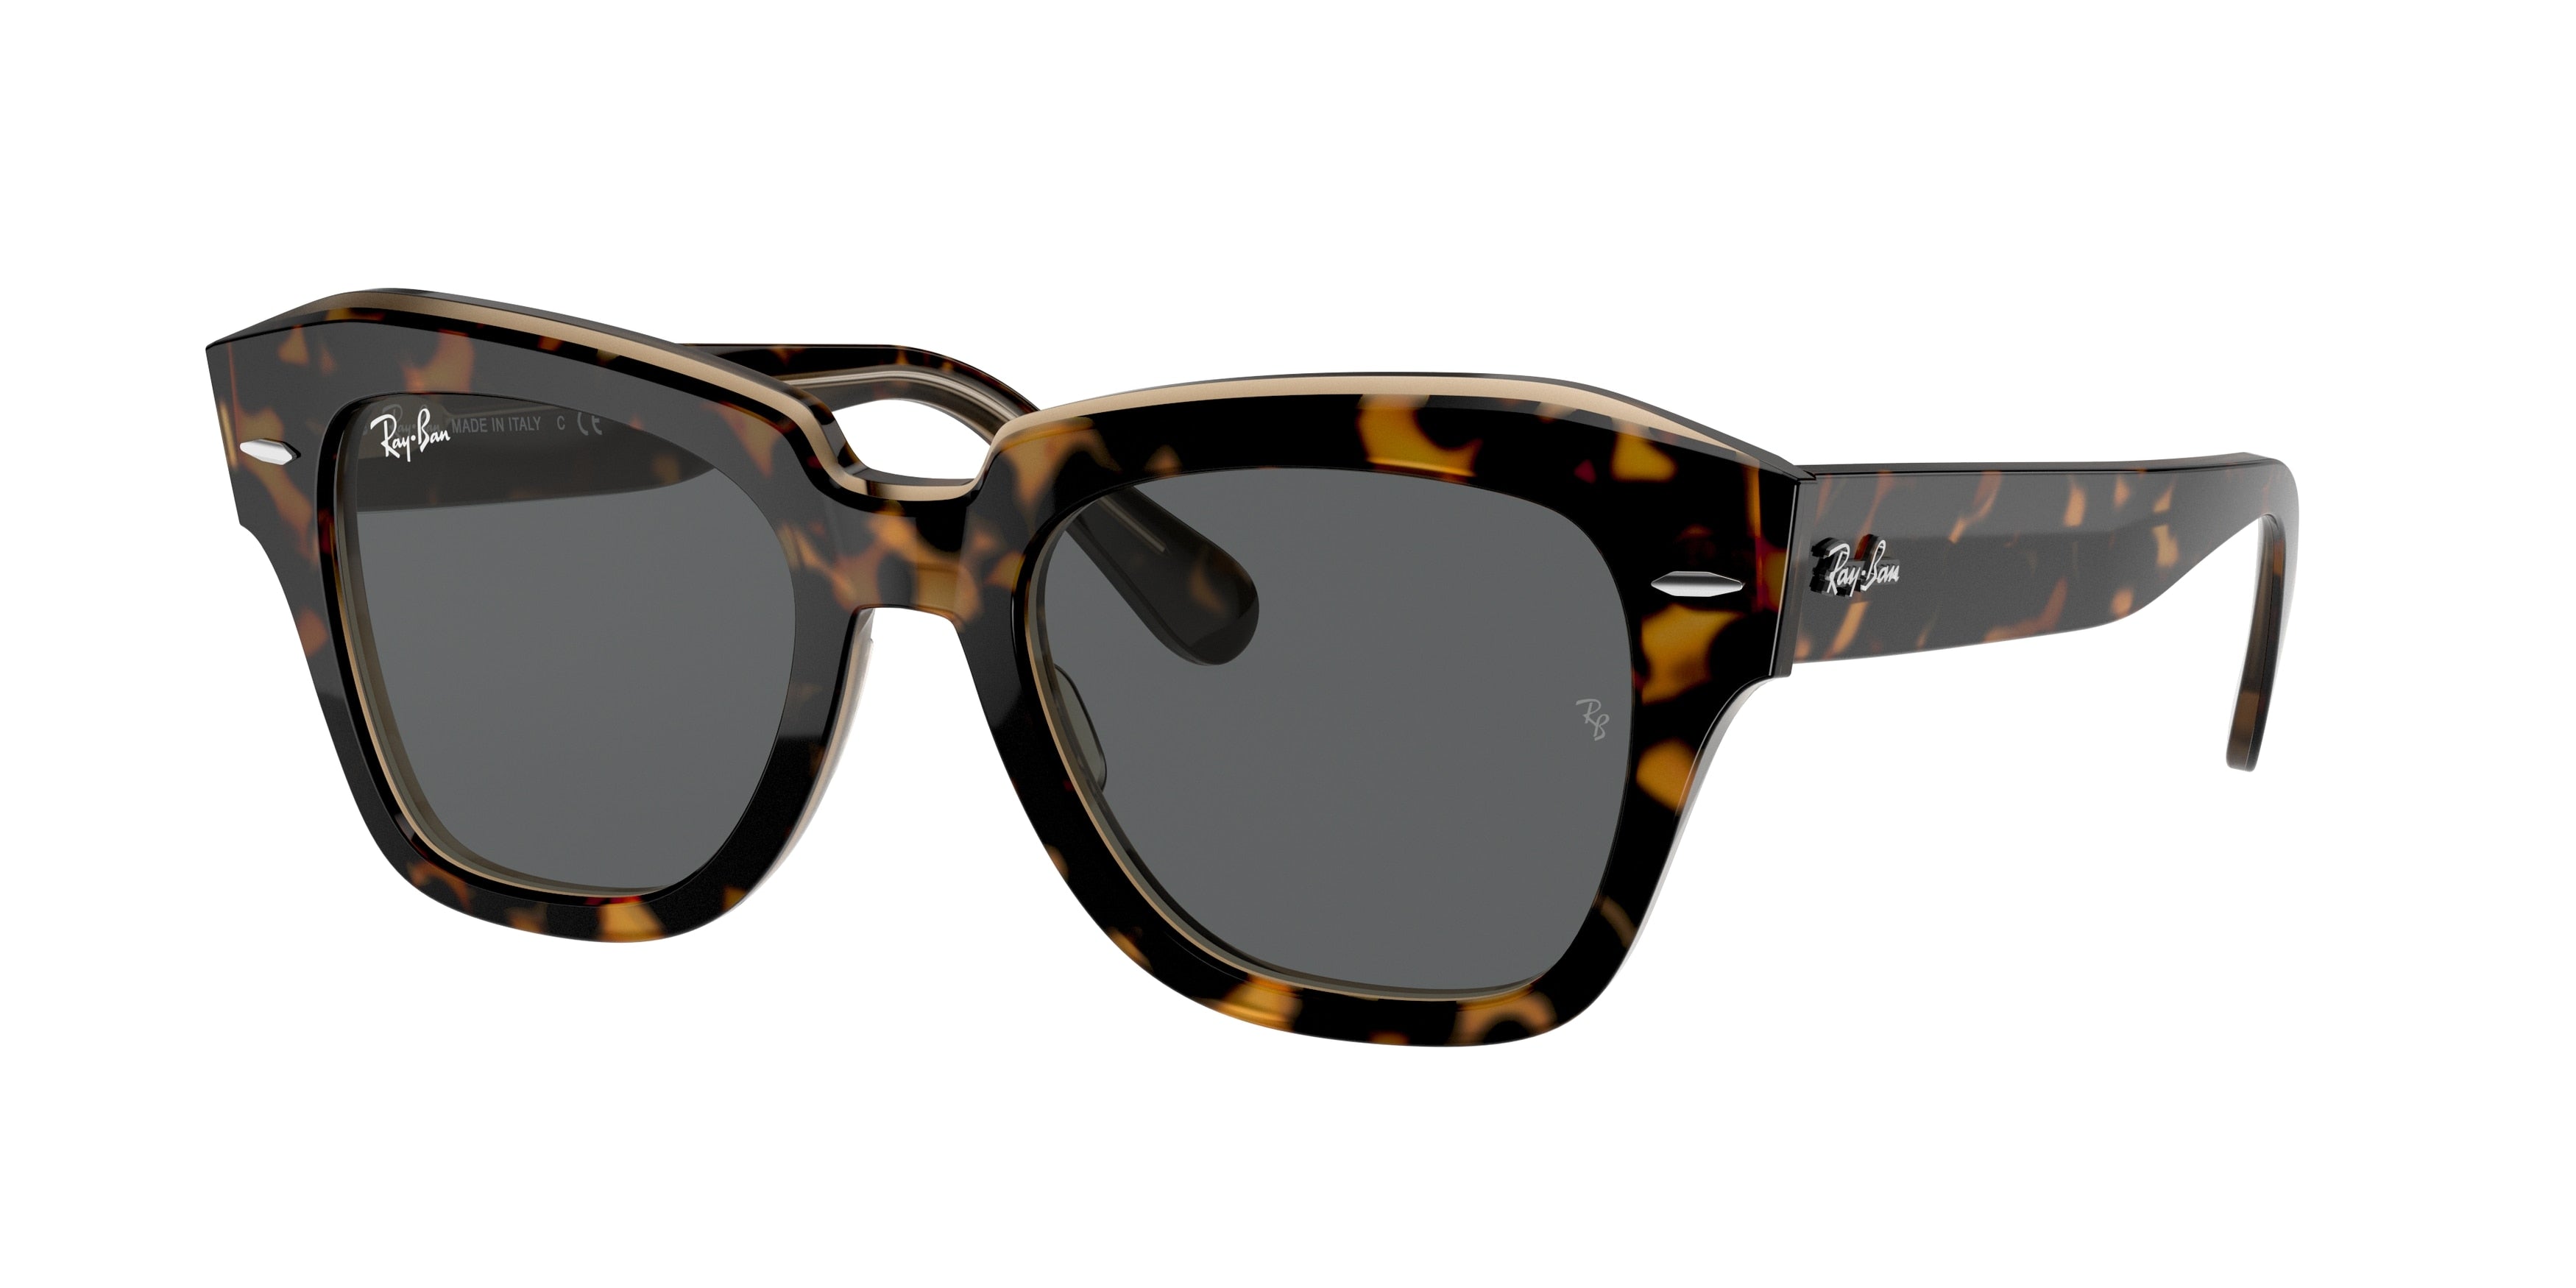 Ray-Ban STATE STREET RB2186 Square Sunglasses  1292B1-Havana On Transparent Brown 52-145-20 - Color Map Gold